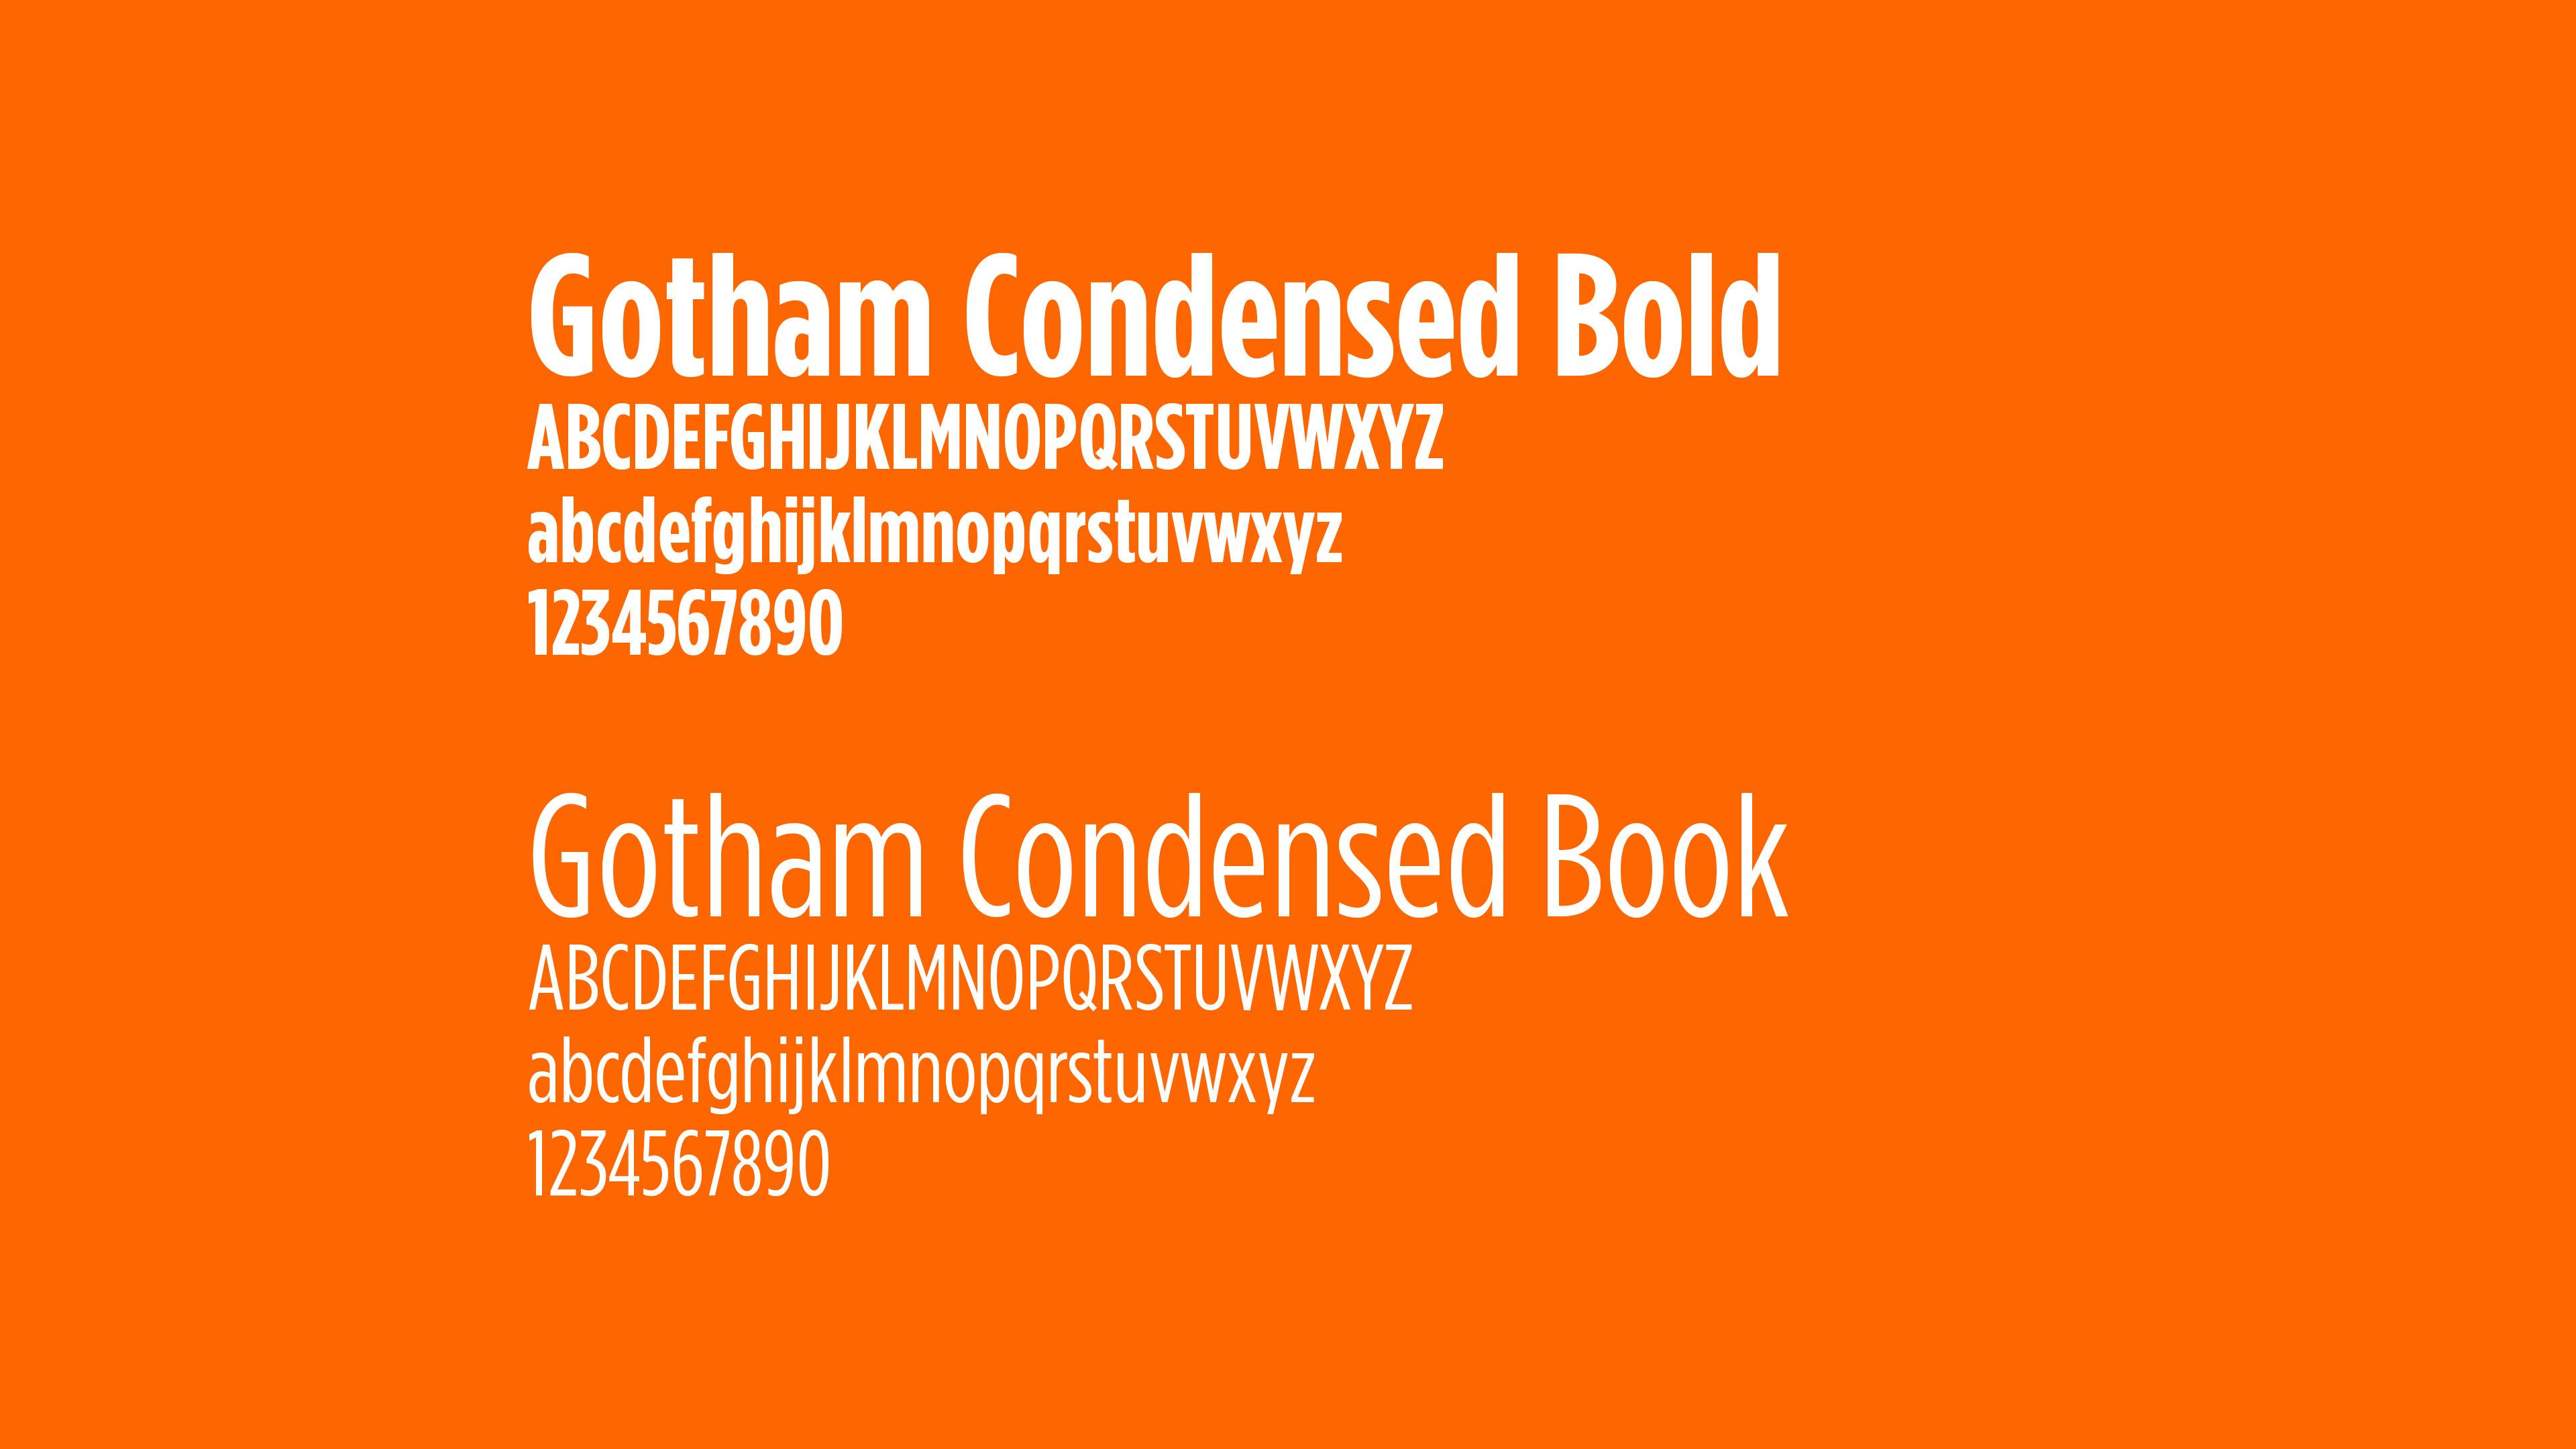 Fonts used in the EI brand: Gotham Condensed Bold and Gotham Condensed Book